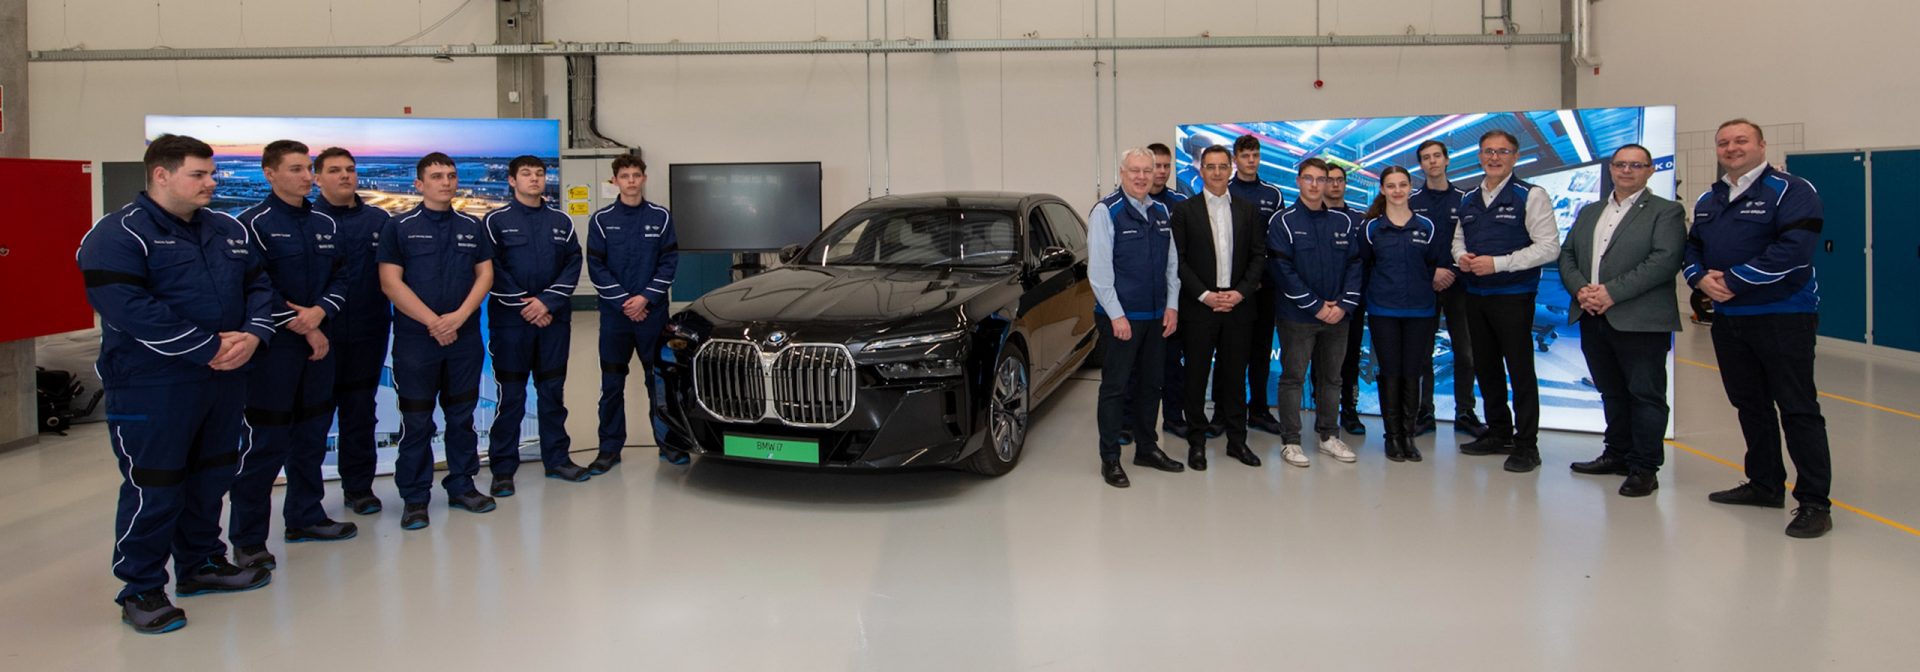 Students are standing around a bmw 7 series